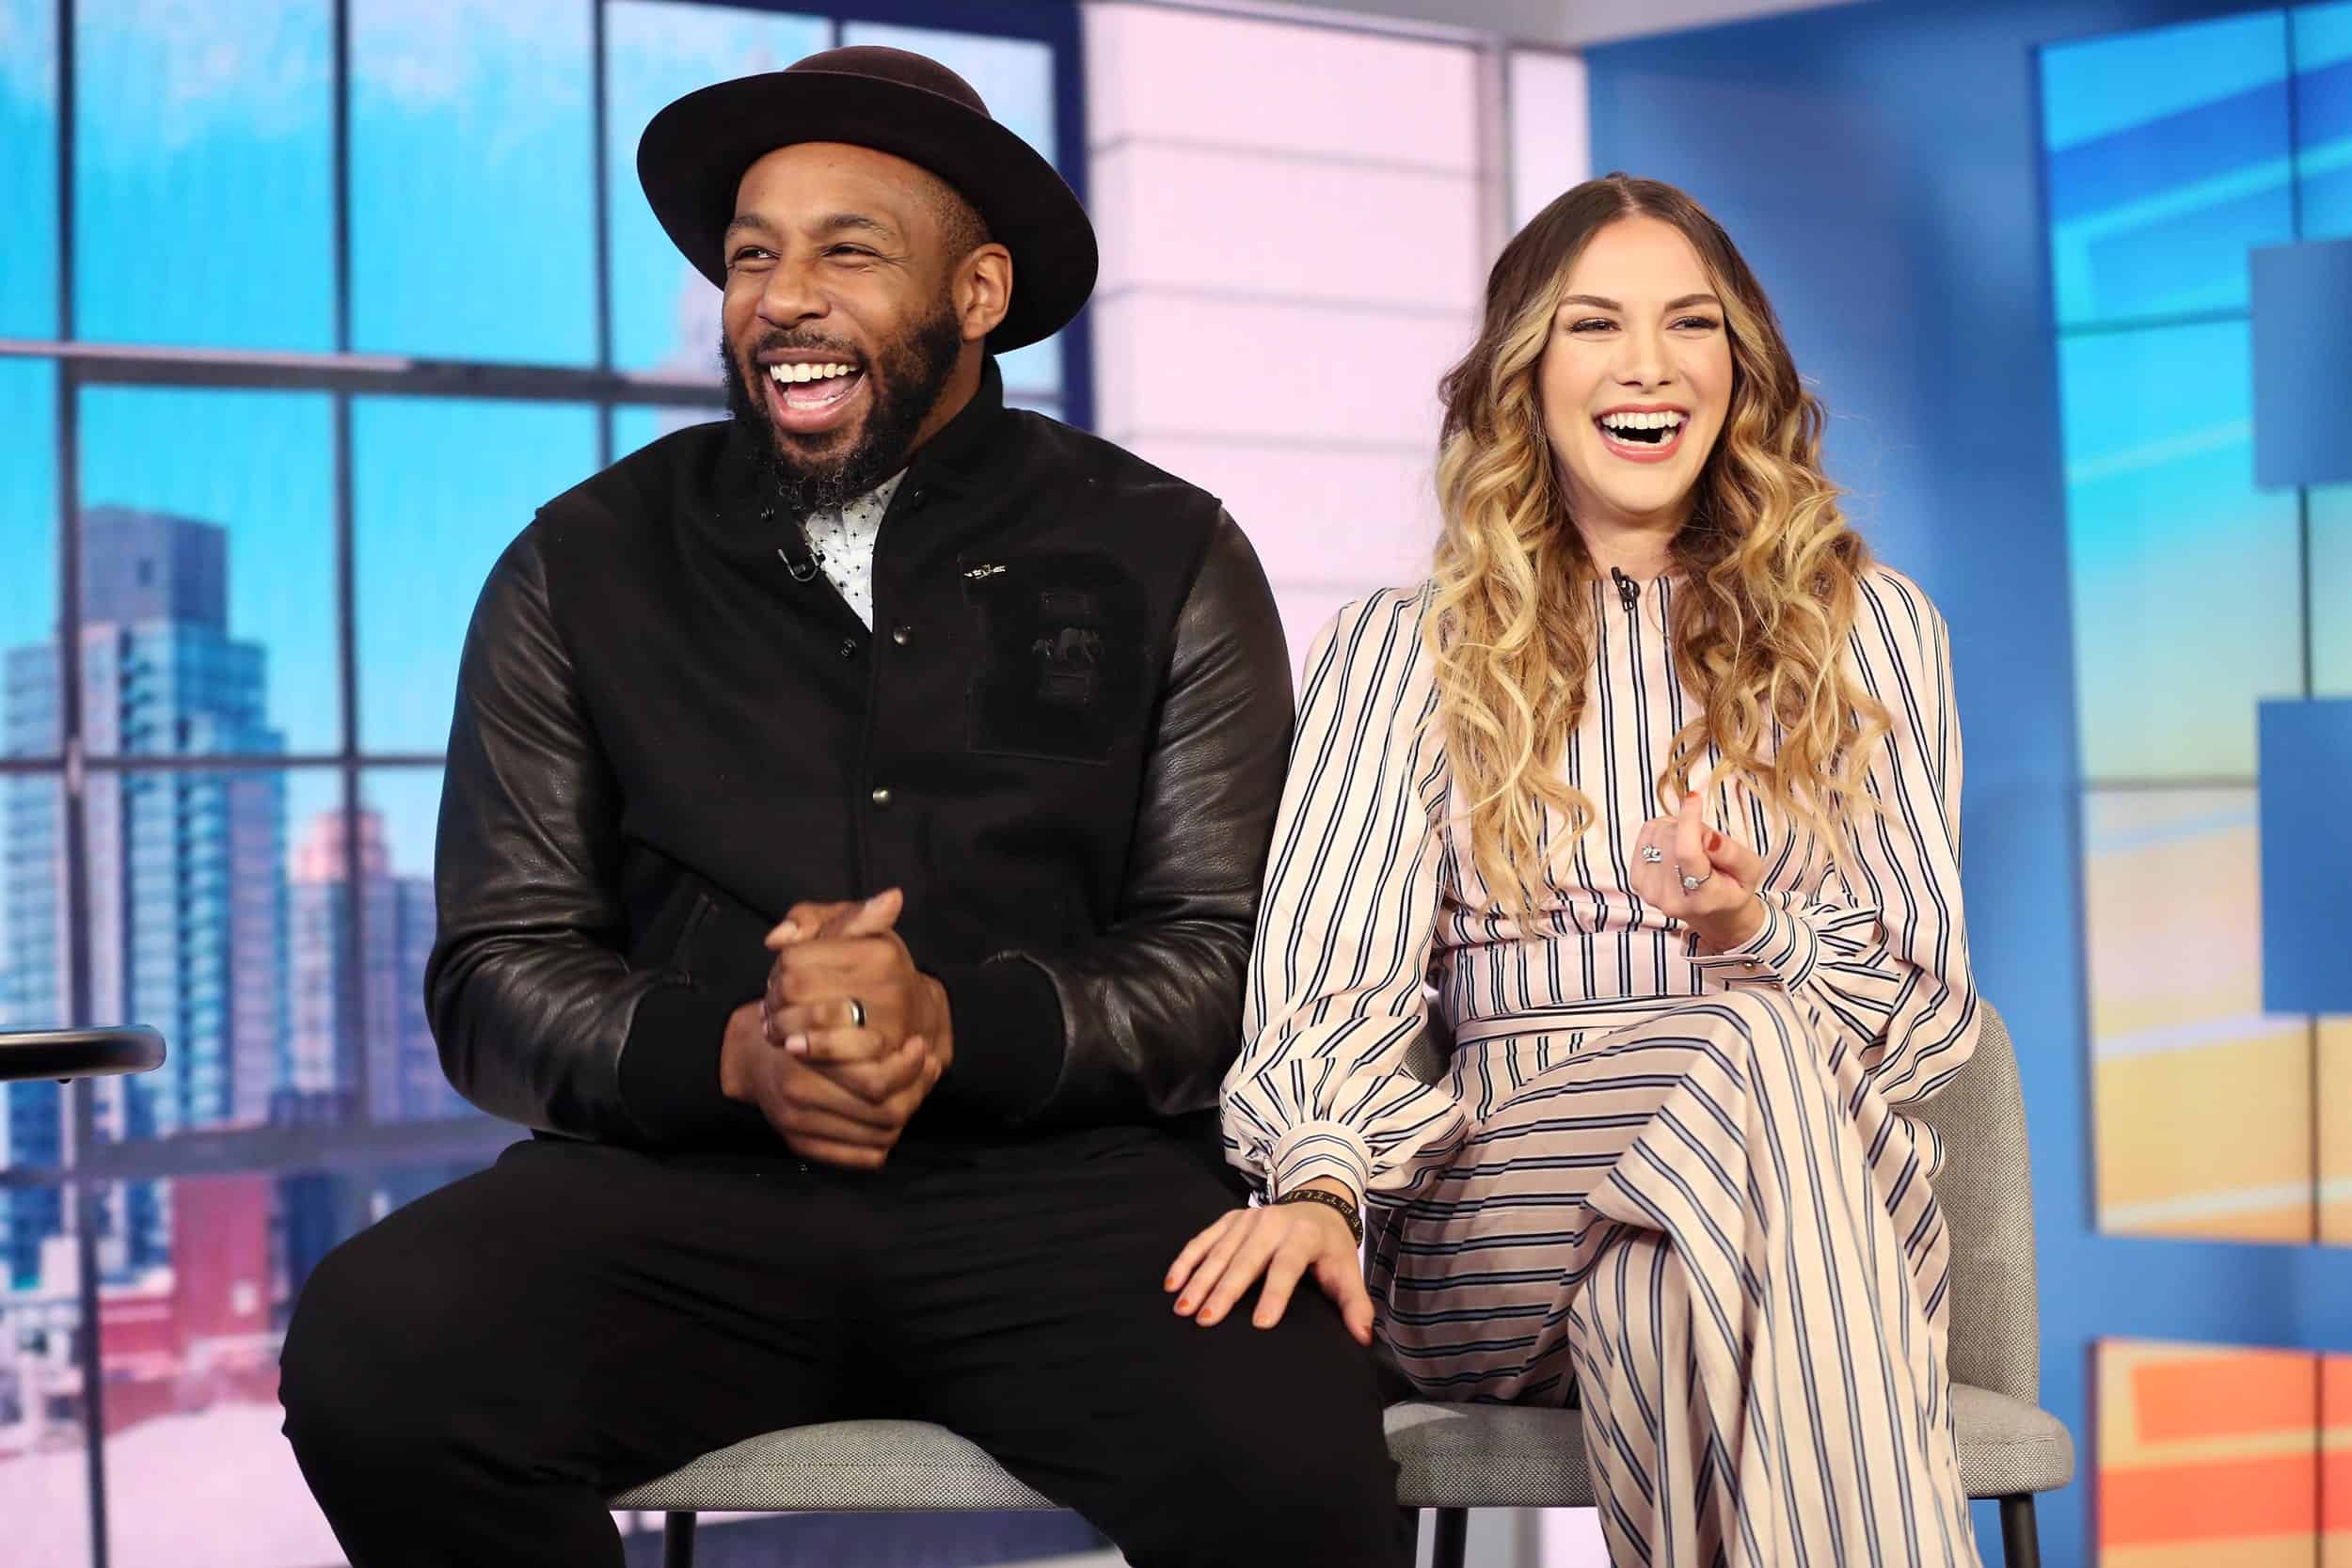 Stephen tWitch and Allison Holker